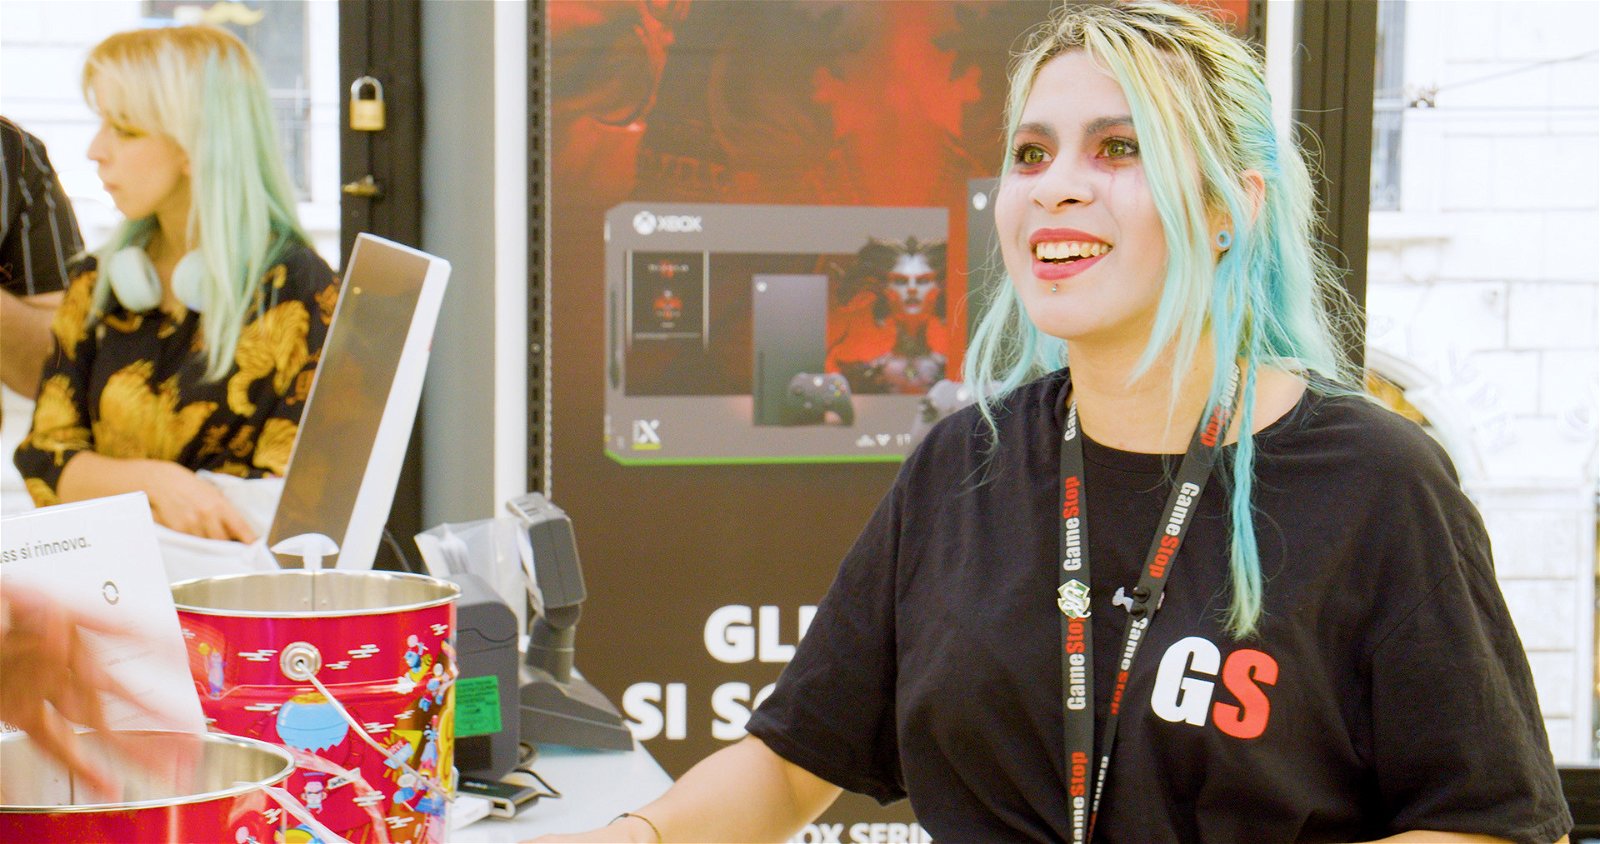 GameStop still in crisis: sales continue to collapse